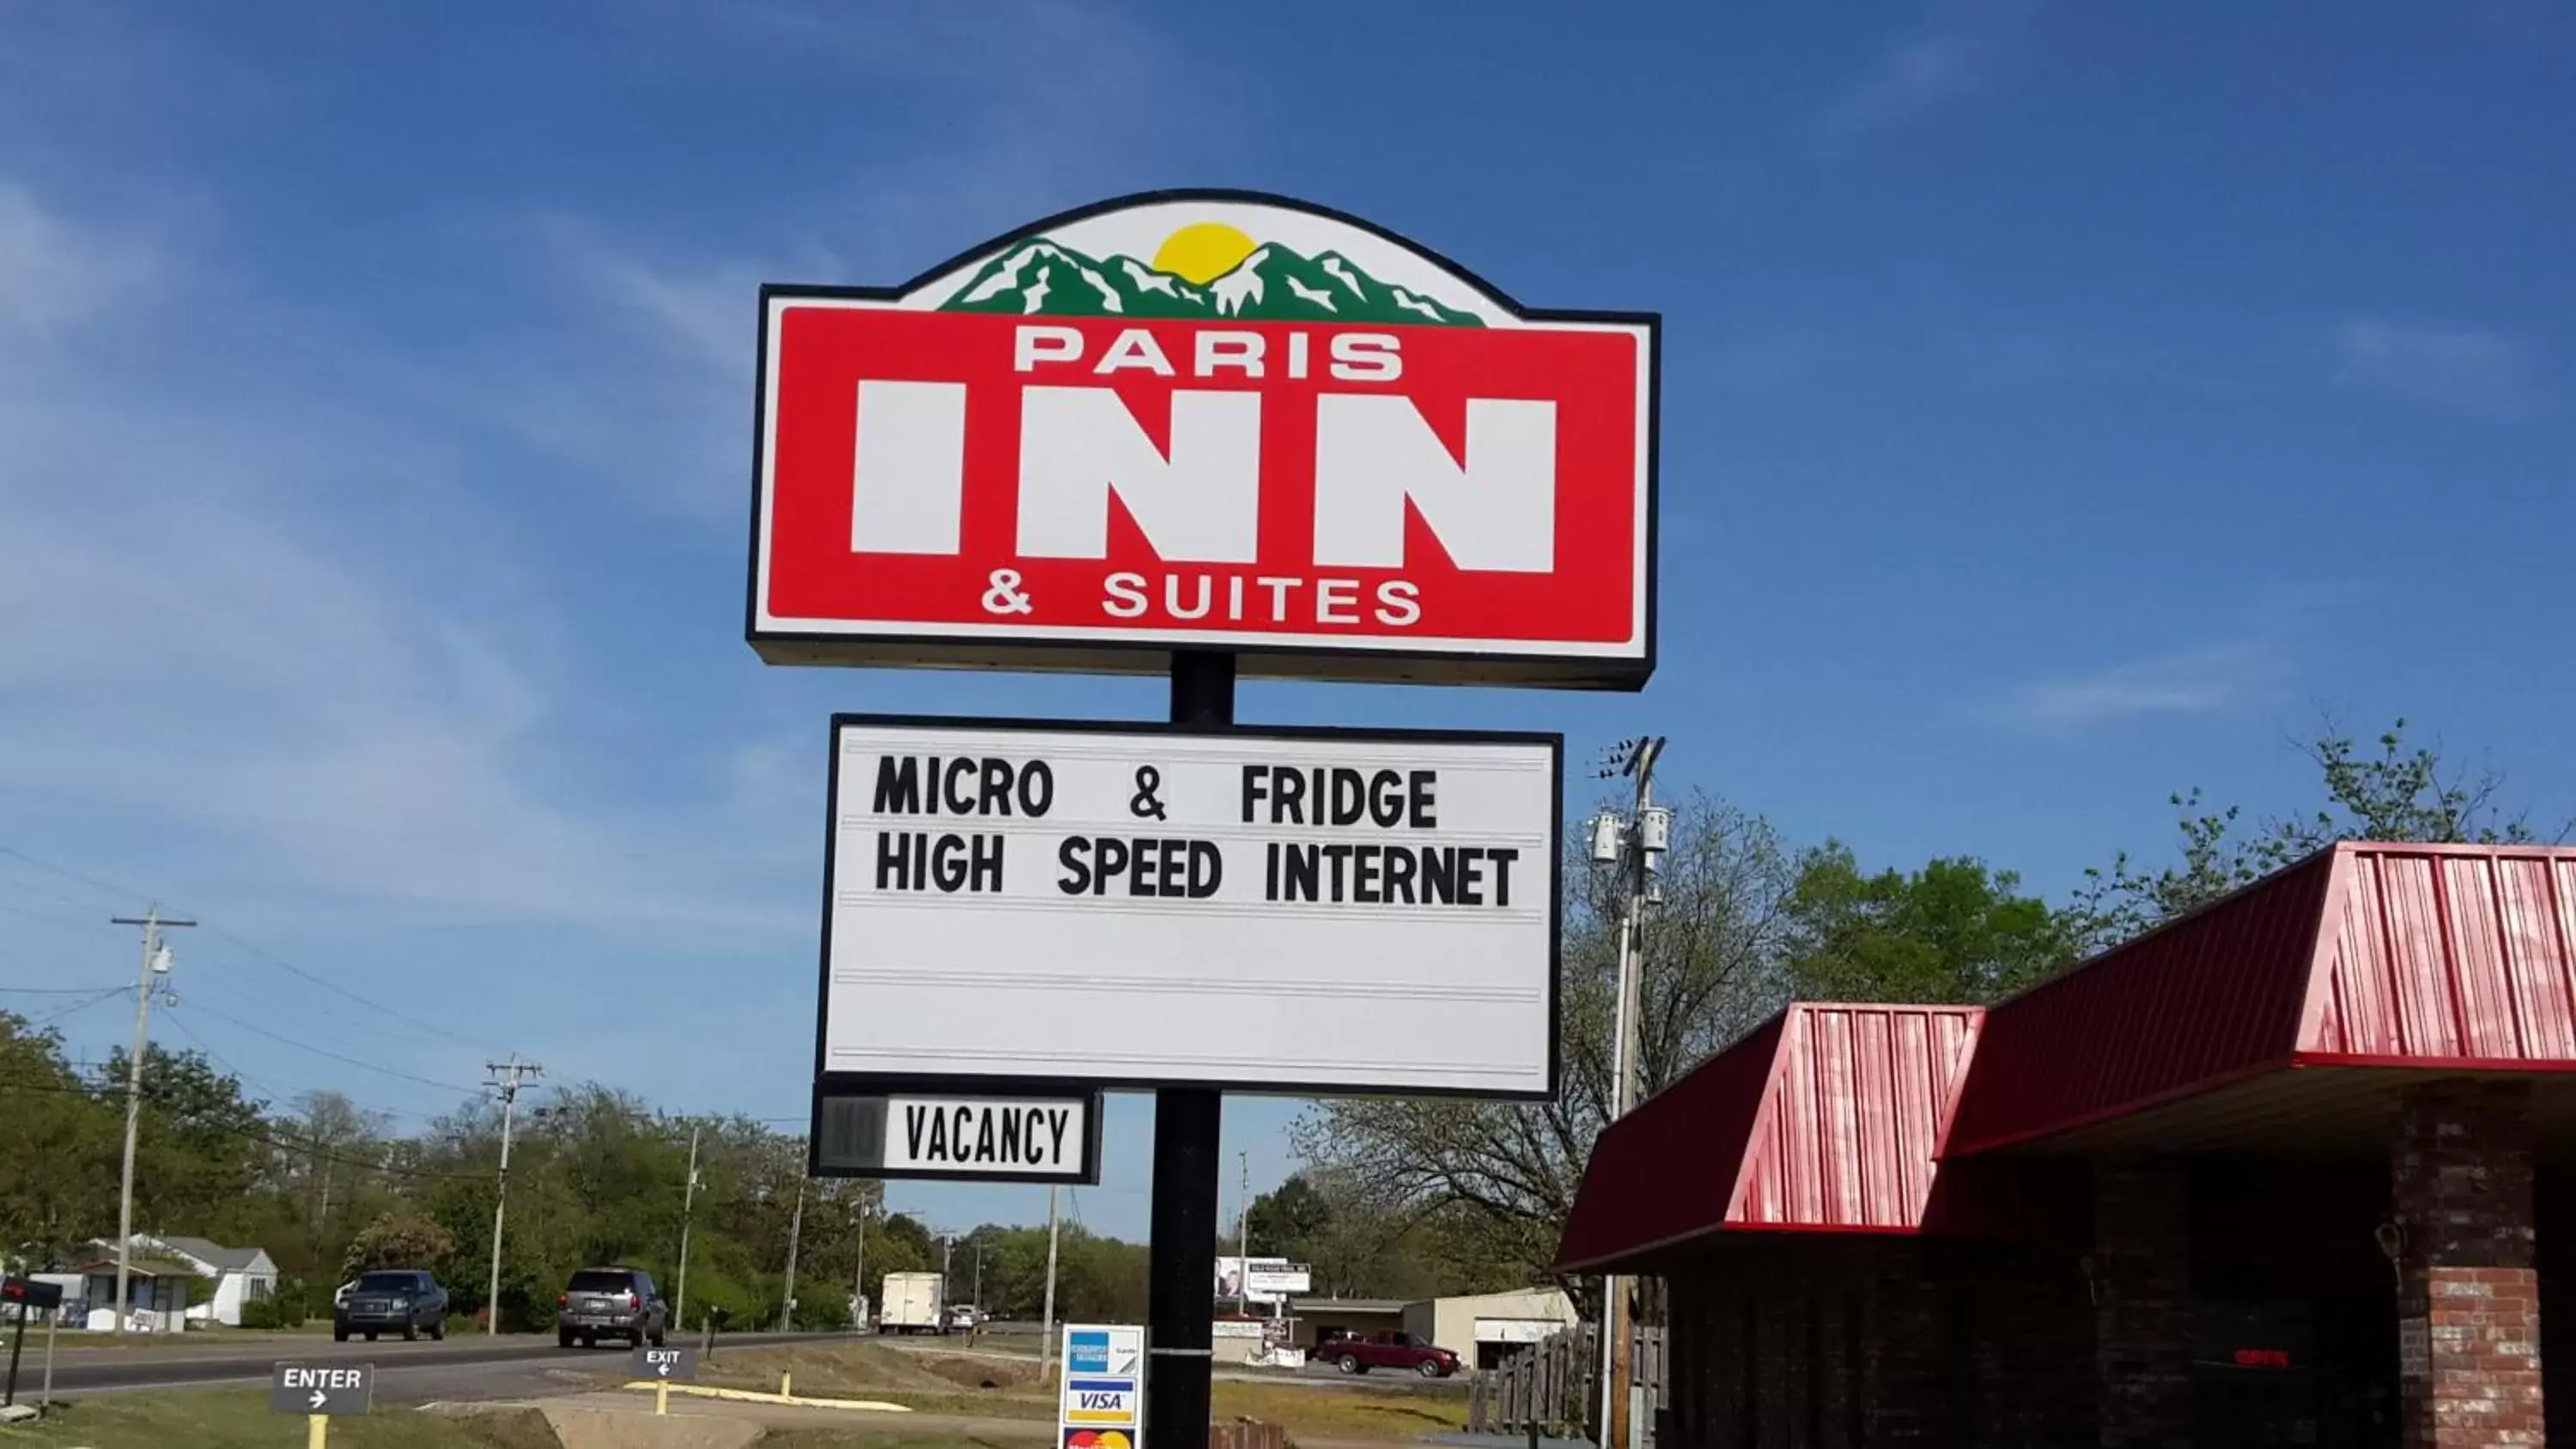 Property Logo/Sign in Paris Inn and Suites